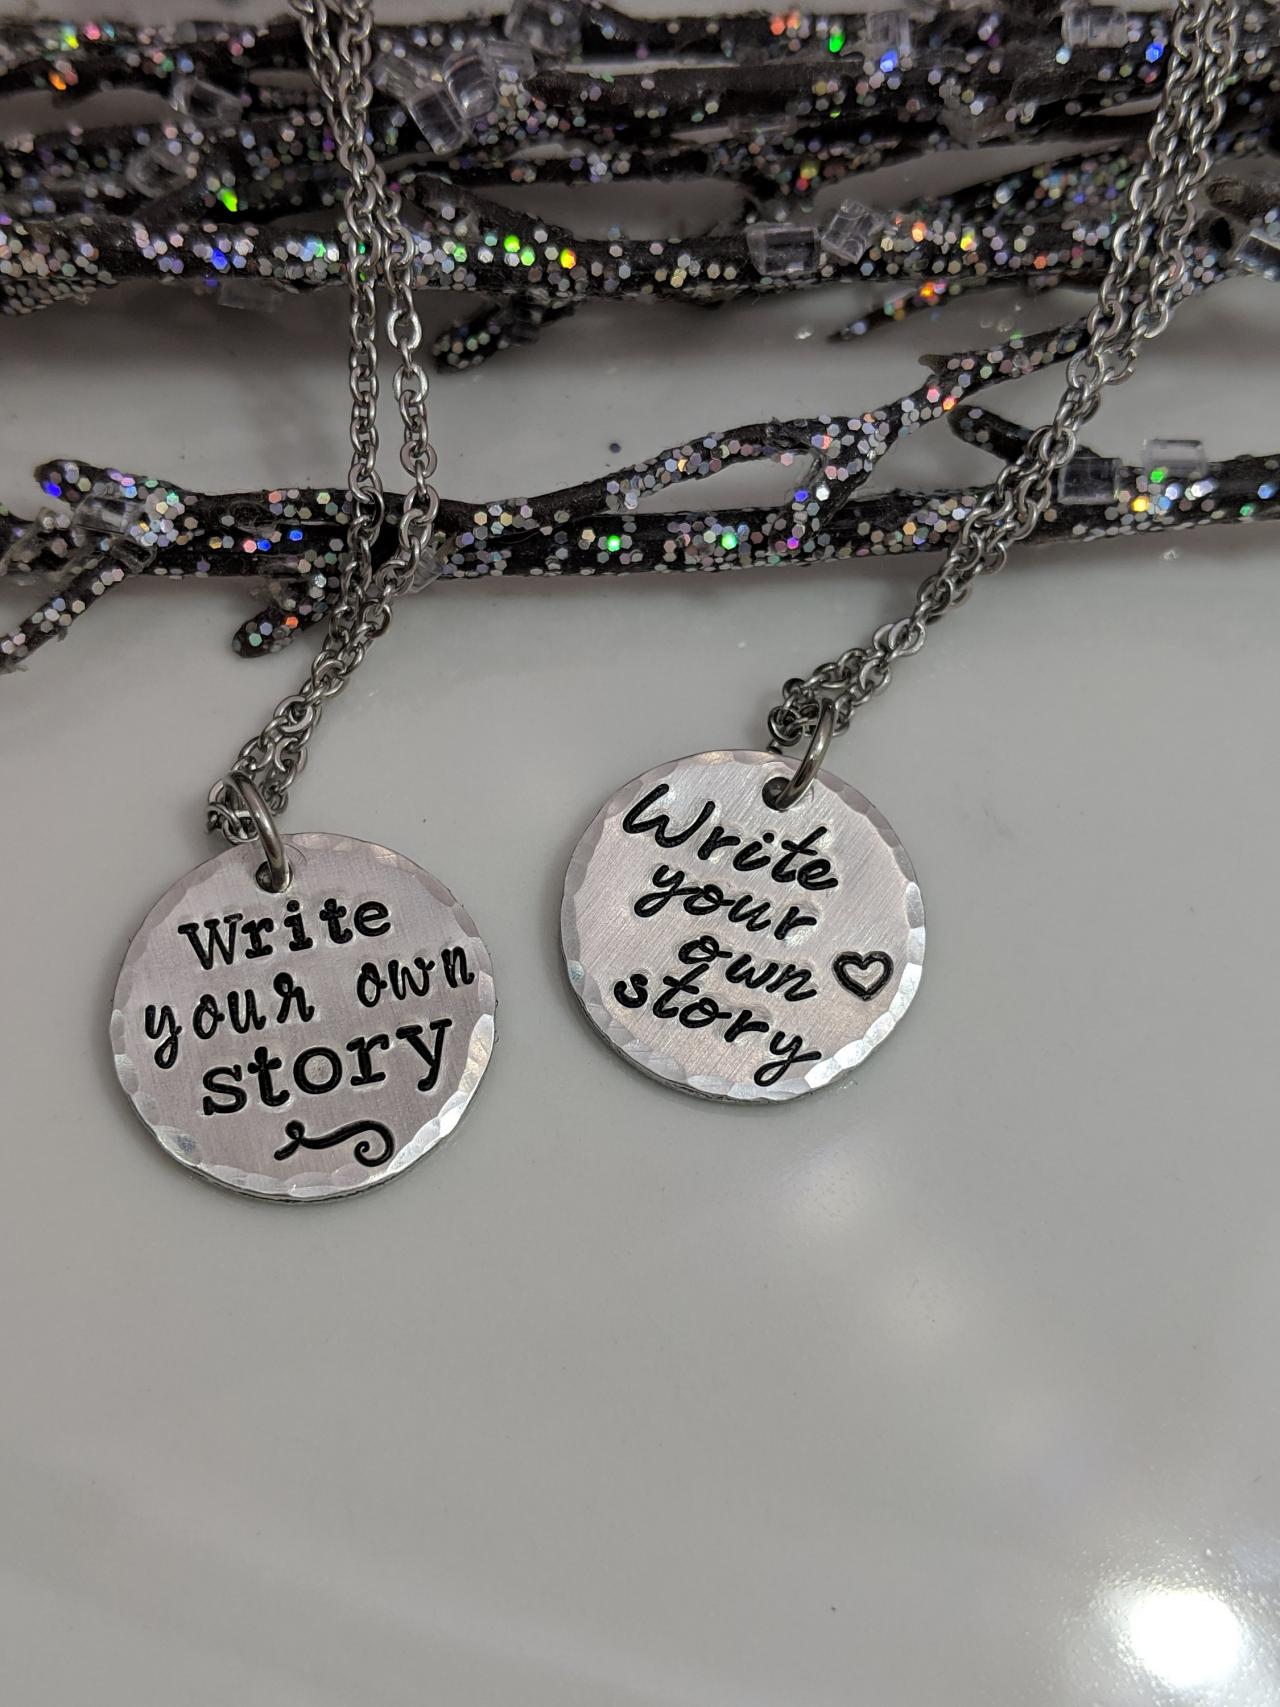 Hand Stamped Necklace Write Your Own Story - Inspirational - Hand Stamped Jewelry - Motivational - Necklace - Statement - Graduation - Christmas